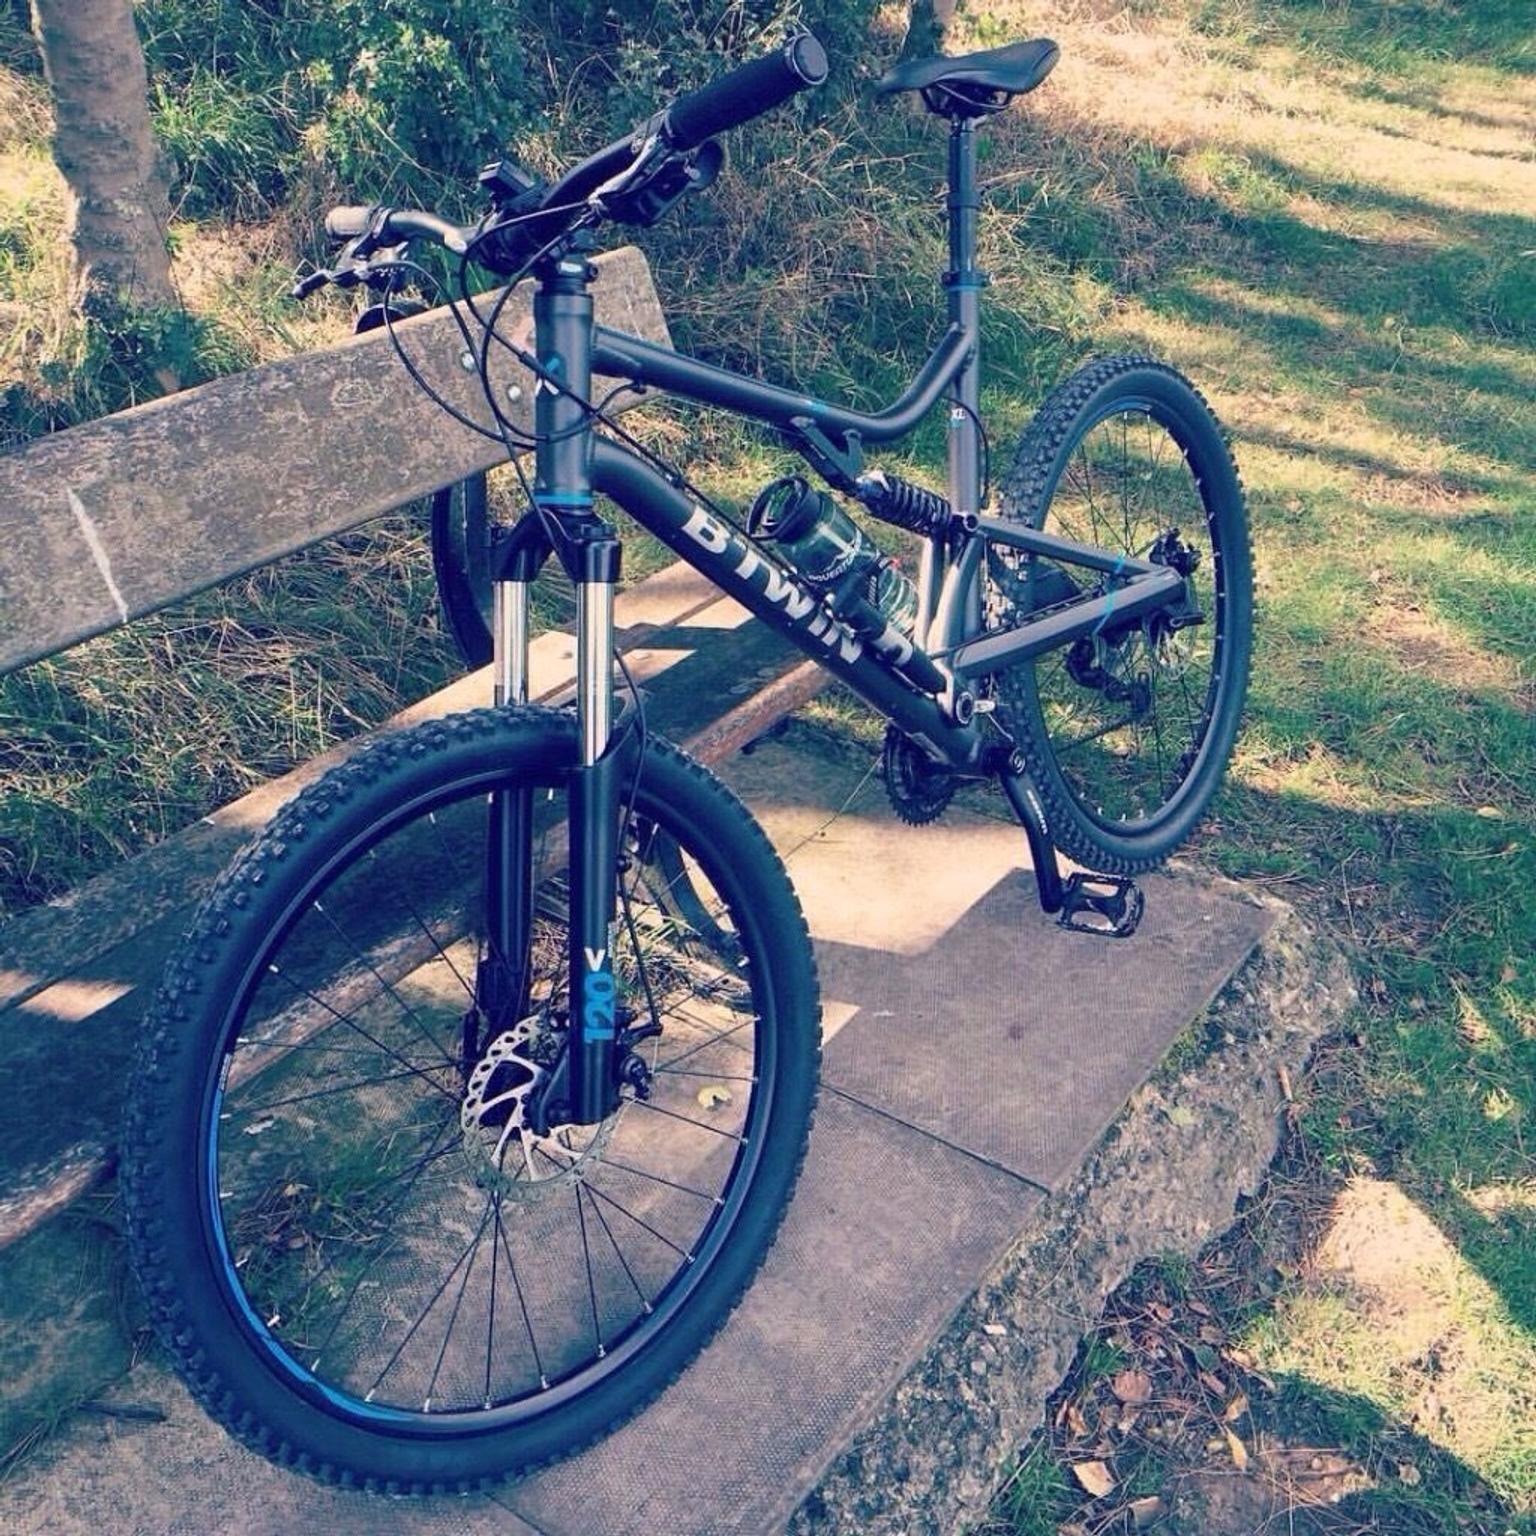 Btwin Rockrider 500s In M13 Manchester For 1 00 For Sale Shpock